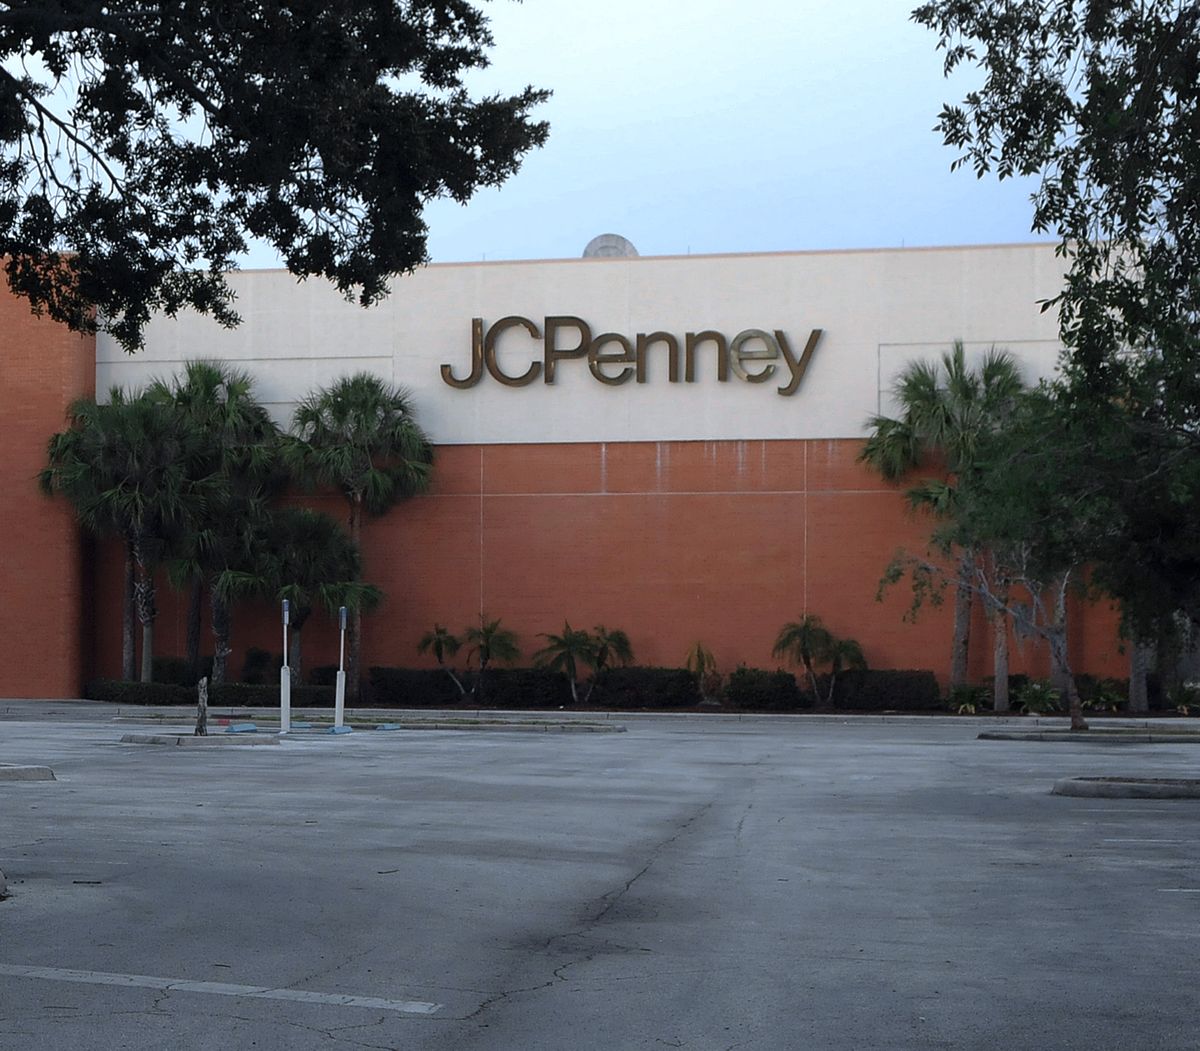 a jc penney store that was temporarily closed due to the